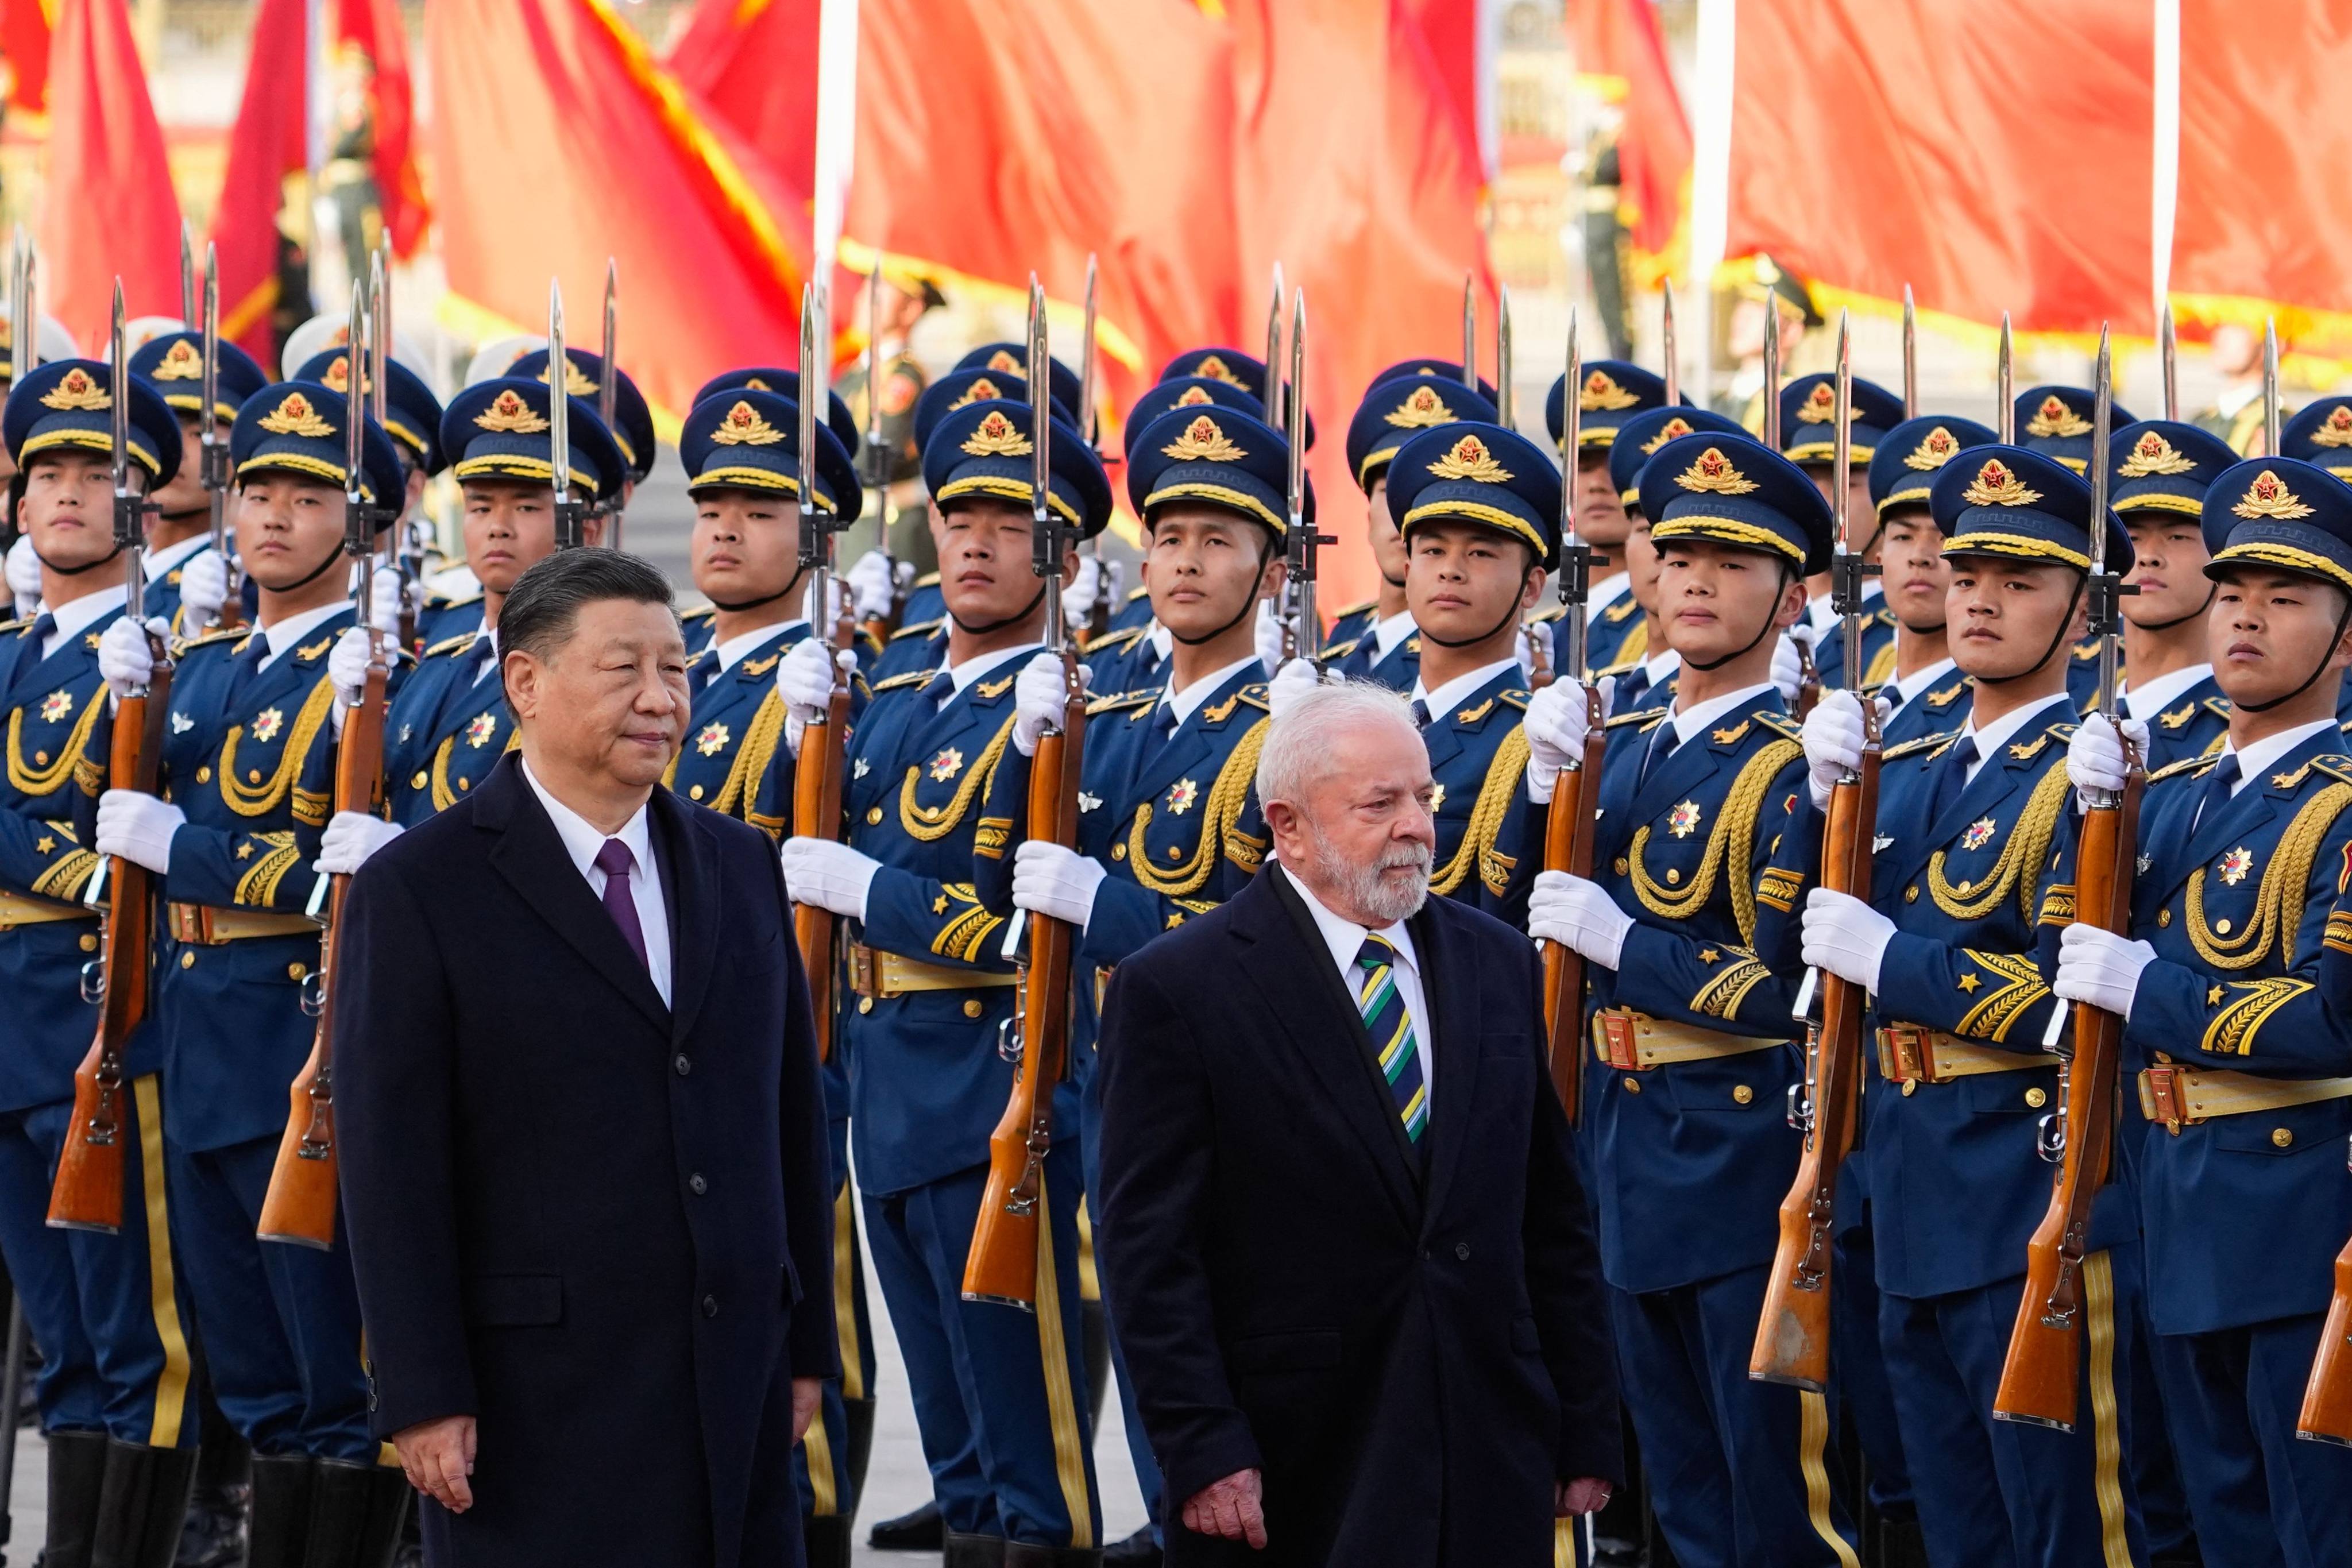 Chinese President Xi Jinping (left) and Brazilian President Luiz Inacio Lula da Silva attend a welcome ceremony at the Great Hall of the People in Beijing on Friday. Photo: AFP